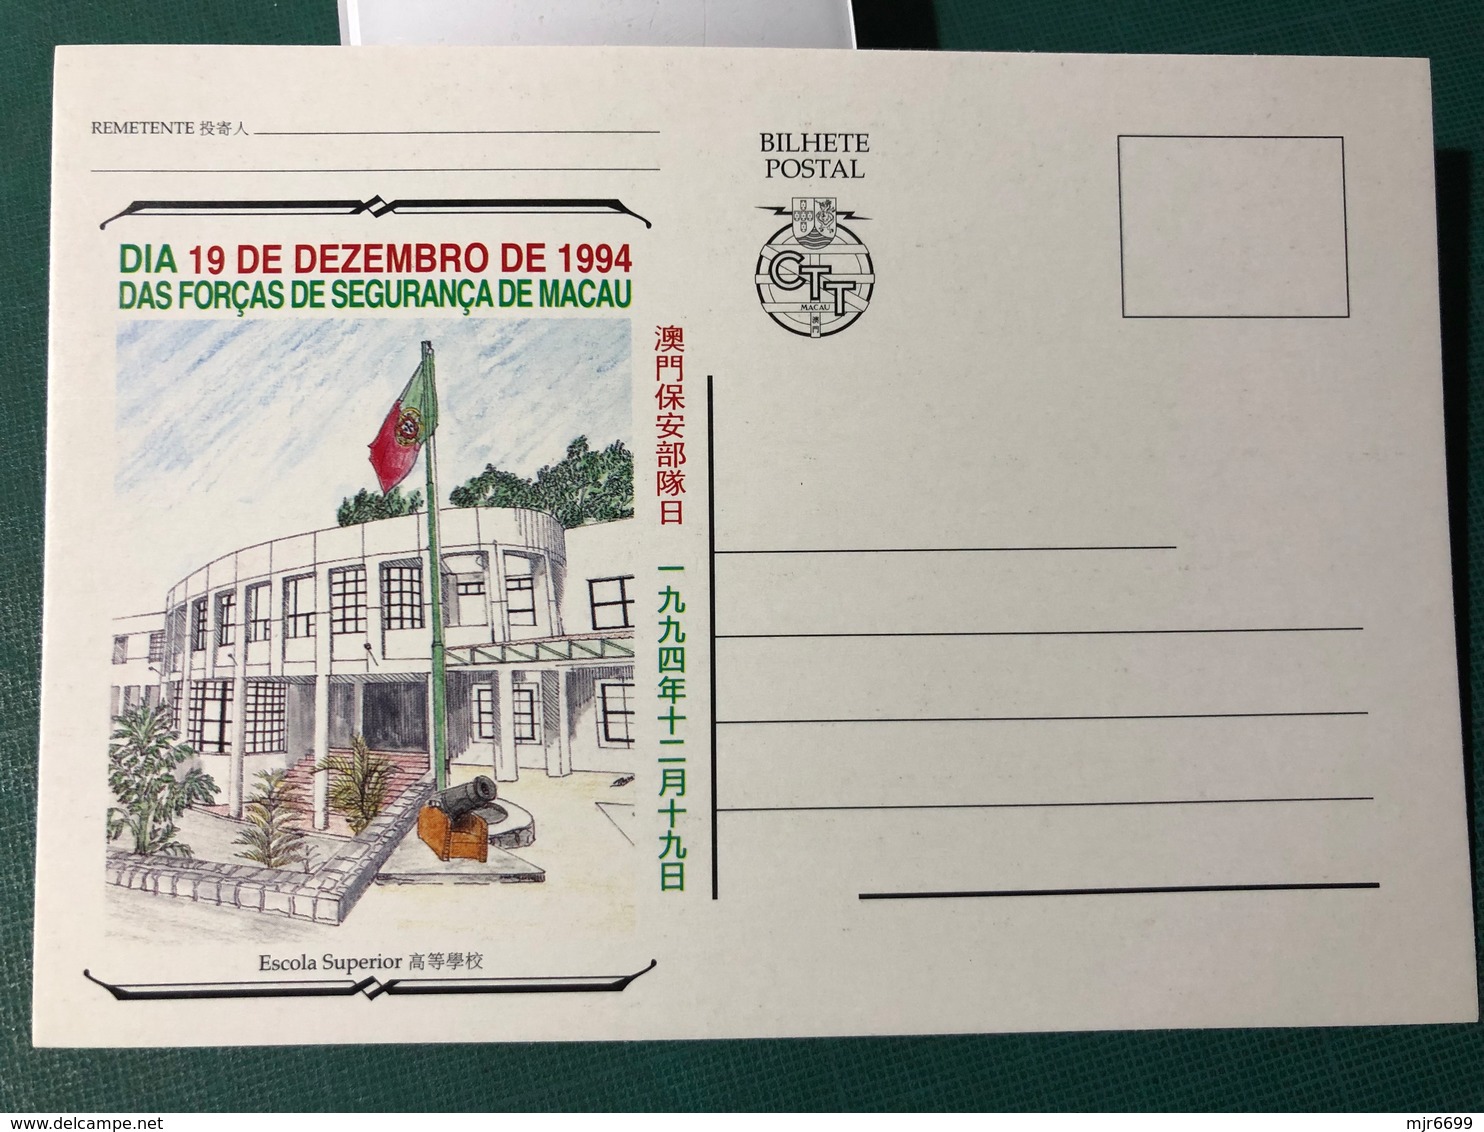 MACAU 1994 SECURITY FORCES DAY COMMEMORATIVE POSTAL STATIONERY CARDS SET OF 5.(POST OFFICE NO. BPE 4 TO 8) W\FOLDER